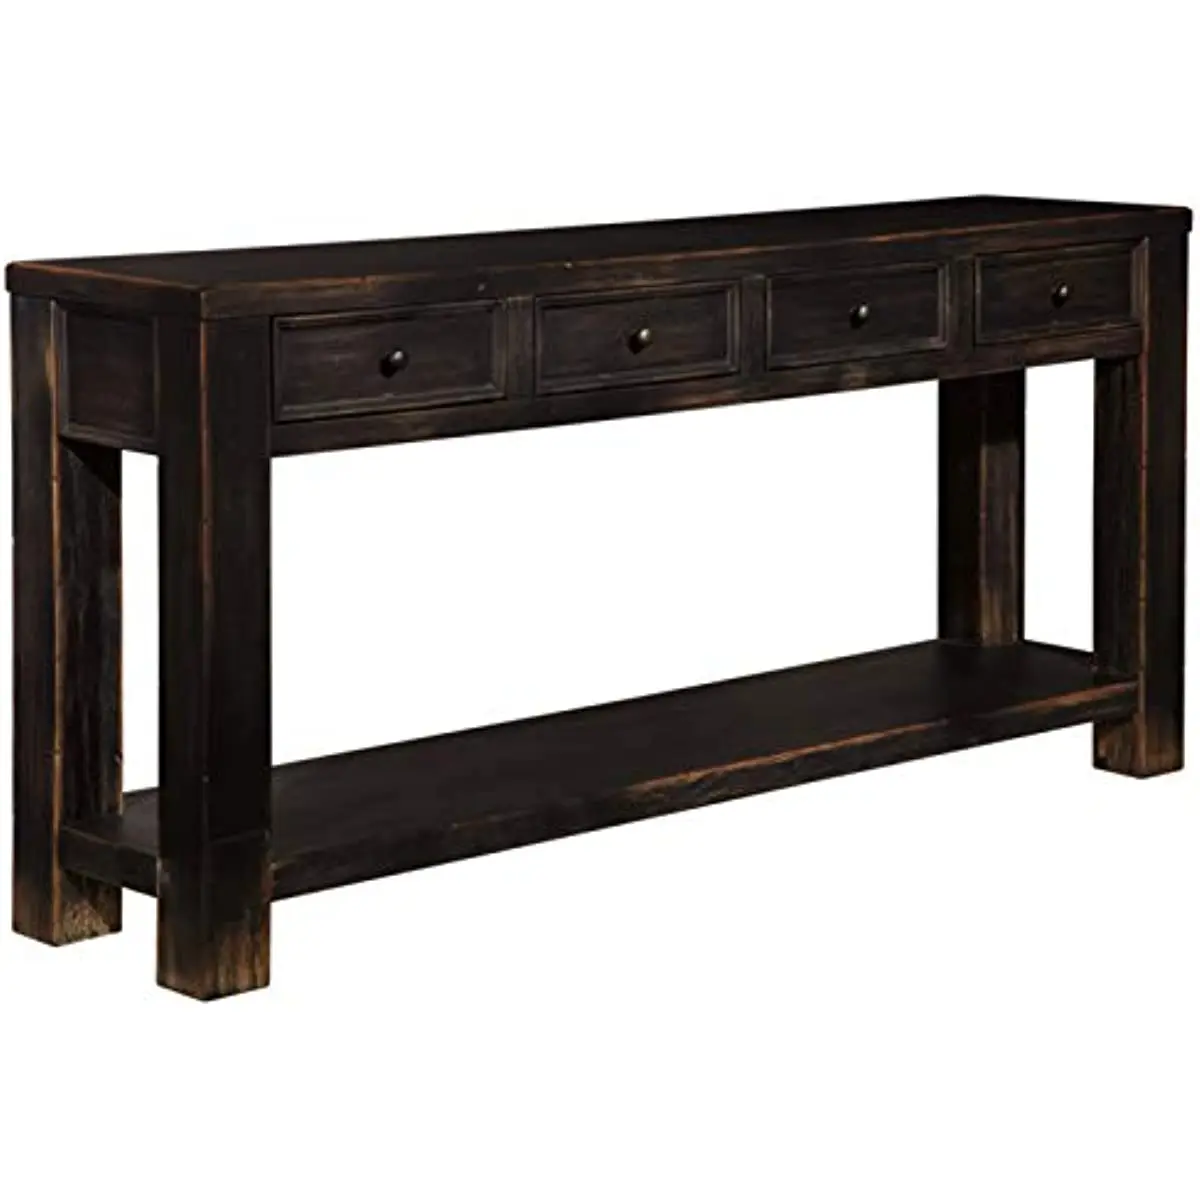 

Gavelston Rustic Sofa Table with 4 Drawers and Lower Shelf, Weathered Black